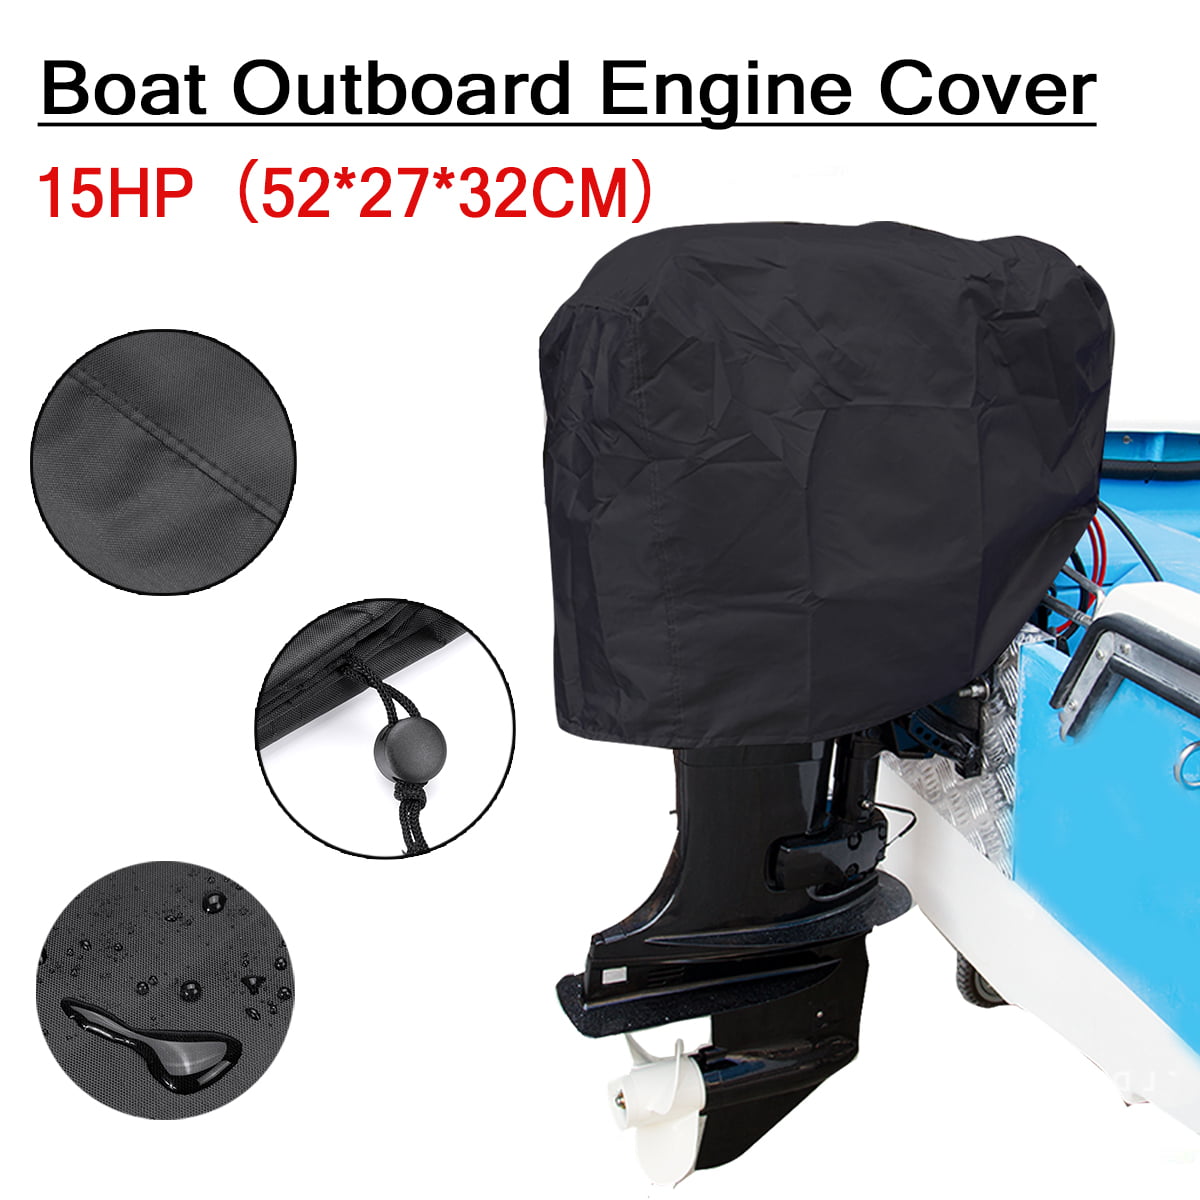 Boat Full Outboard Engine Motor Cover Fits Up to 250HP black 